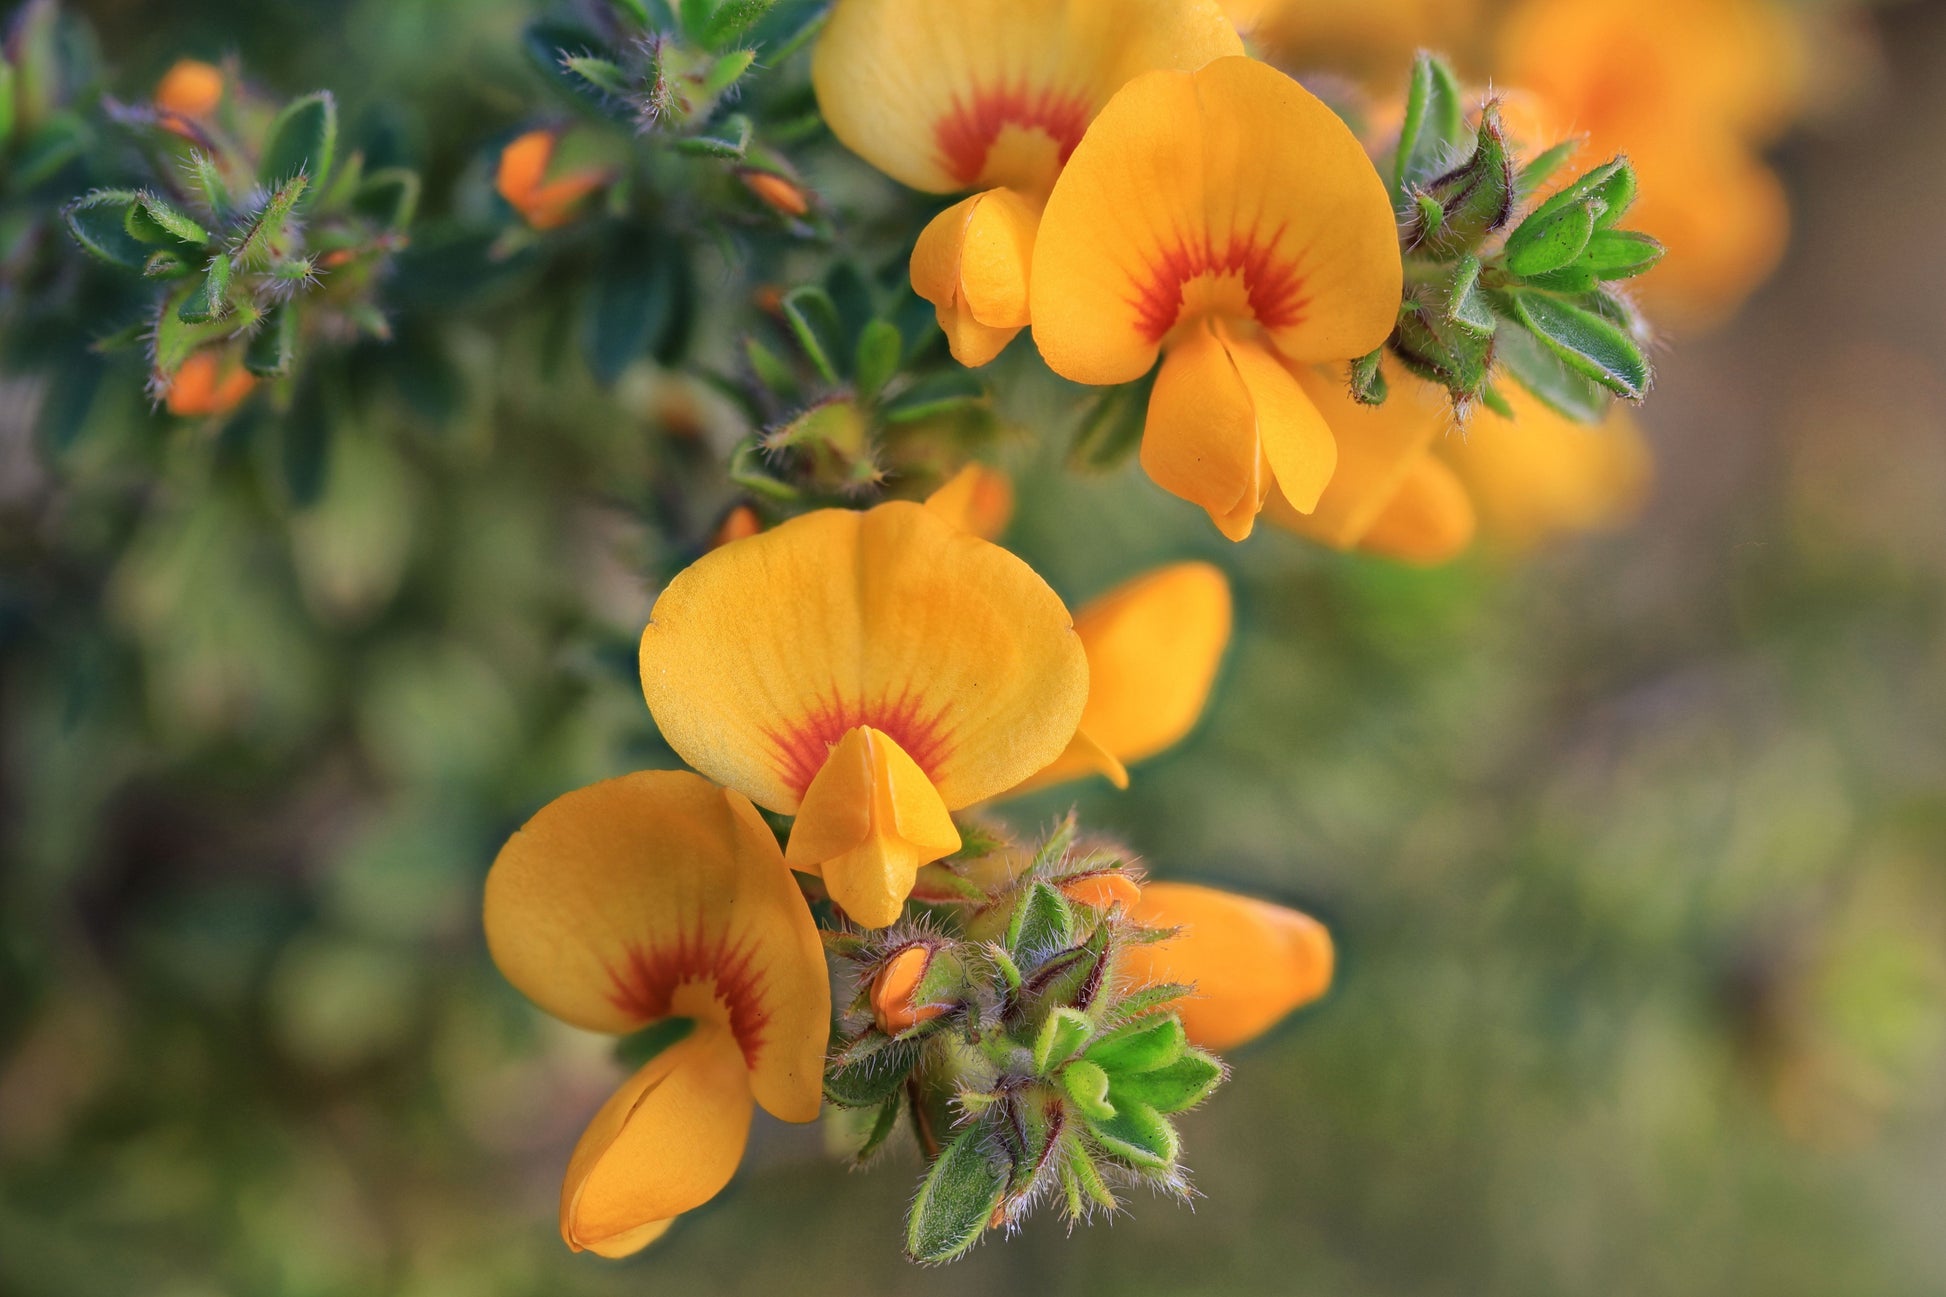 Close up photo of yellow flower and small green buds on Pultenaea villosa